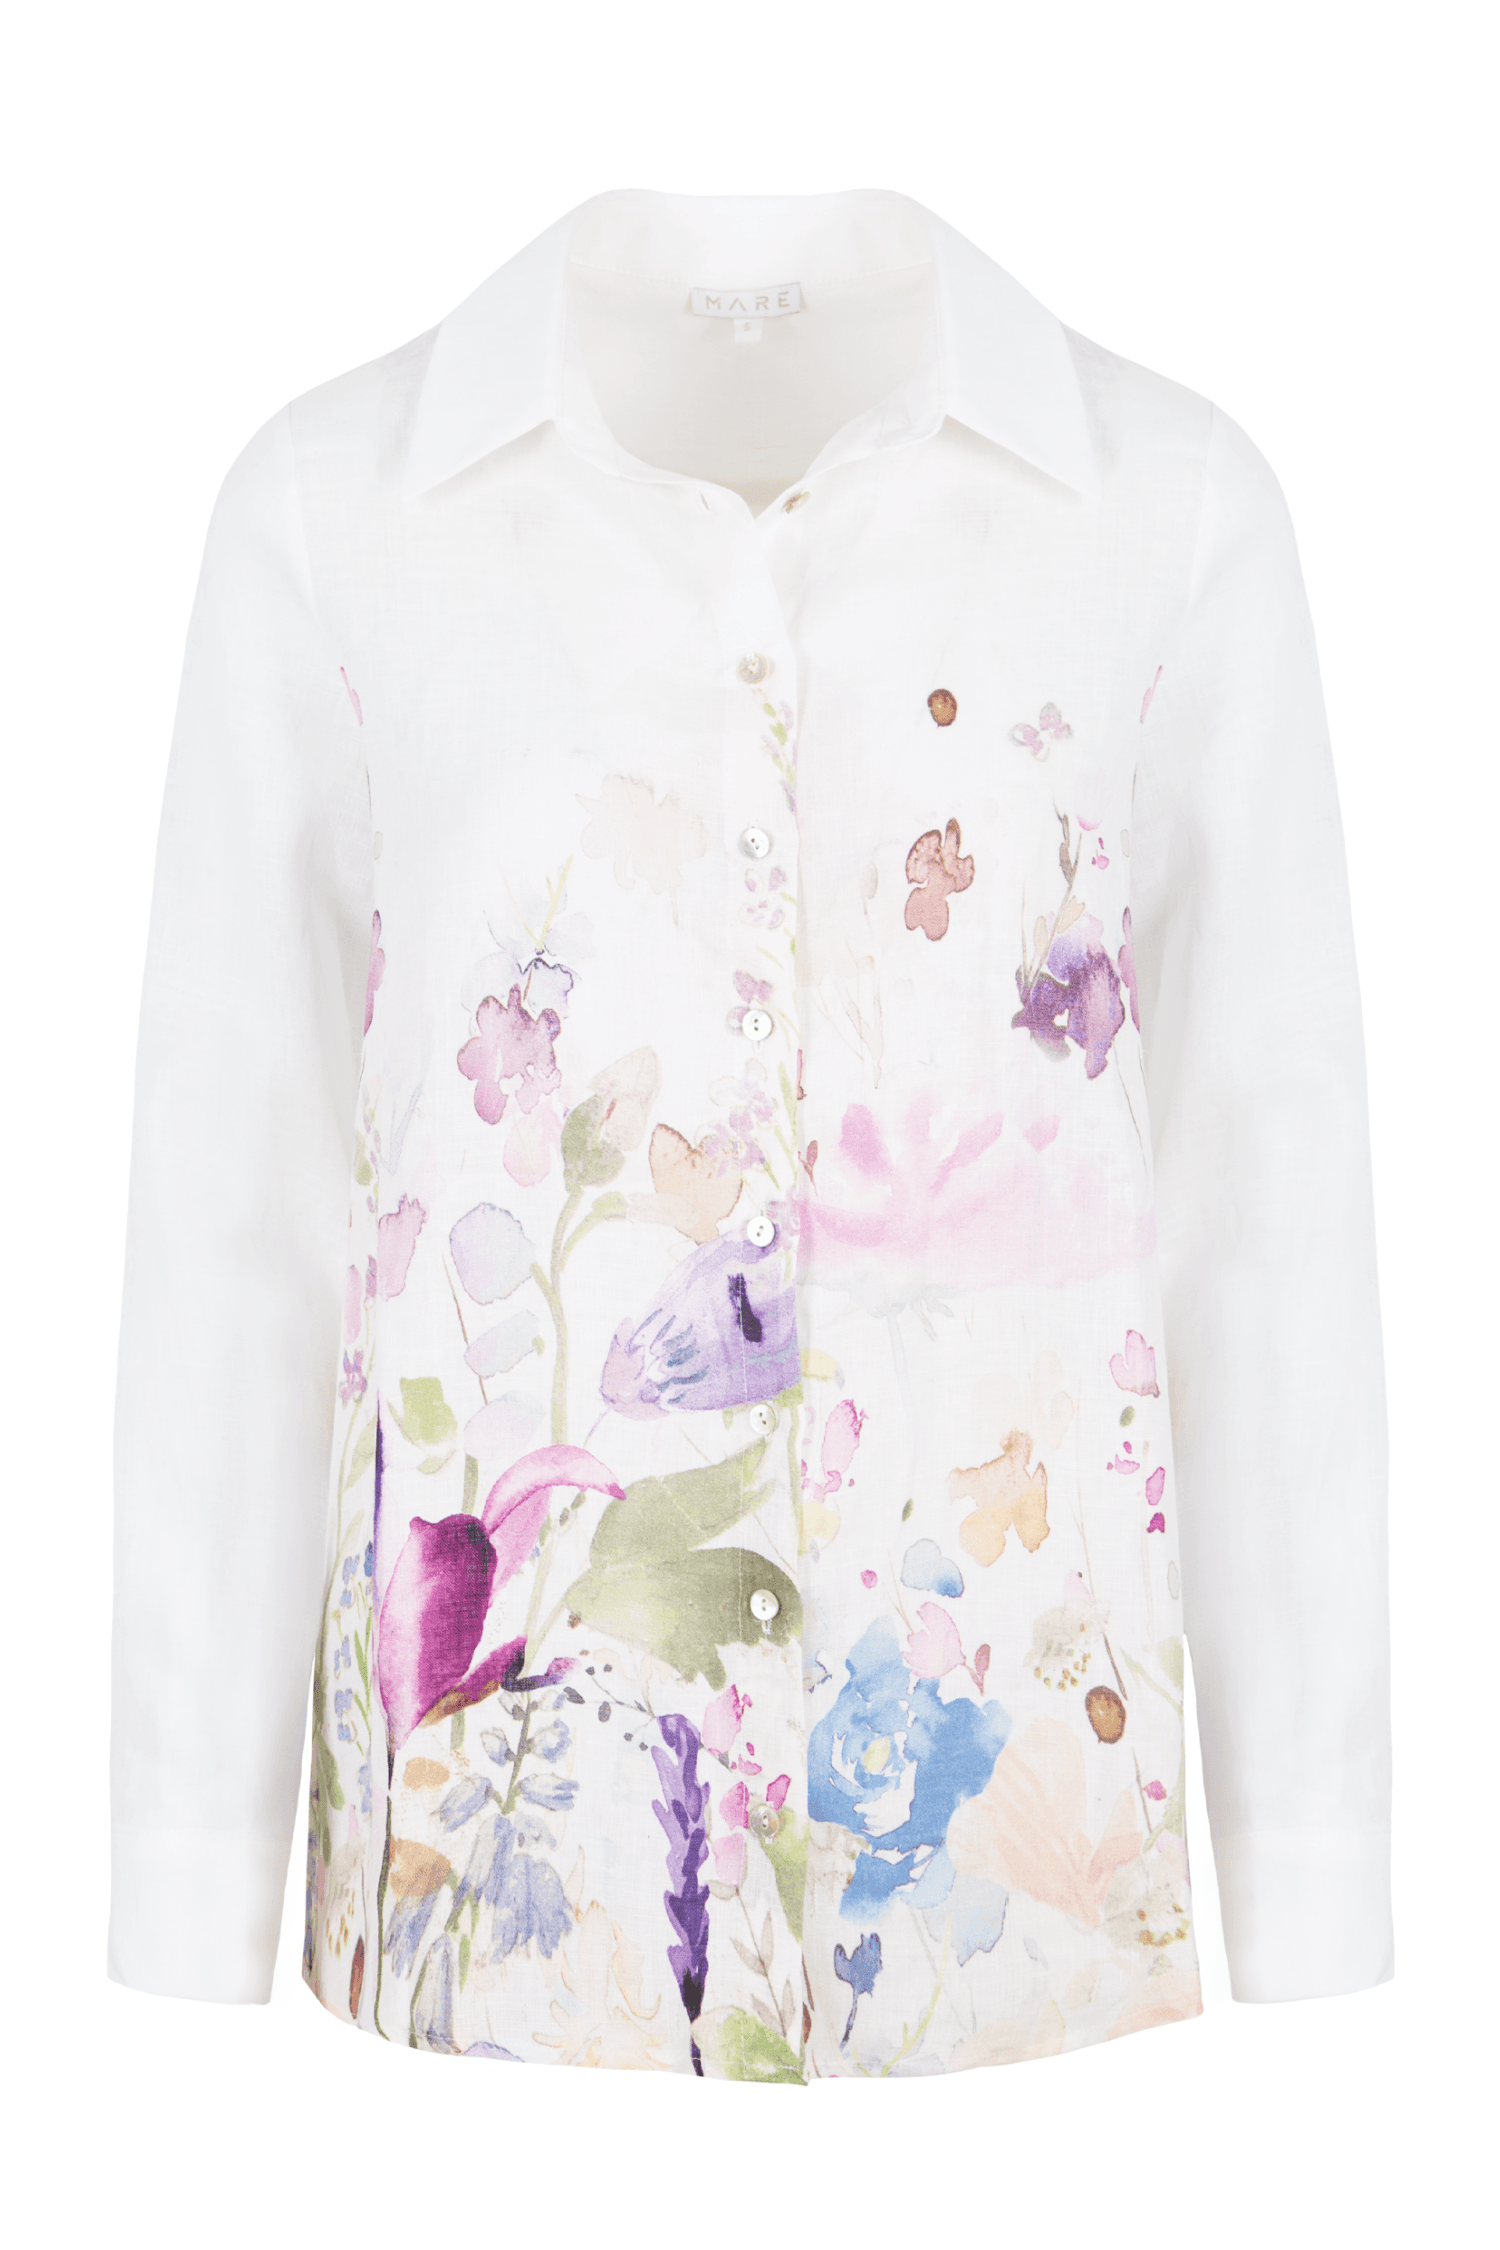 Floral Printed Pure Linen White Shirt